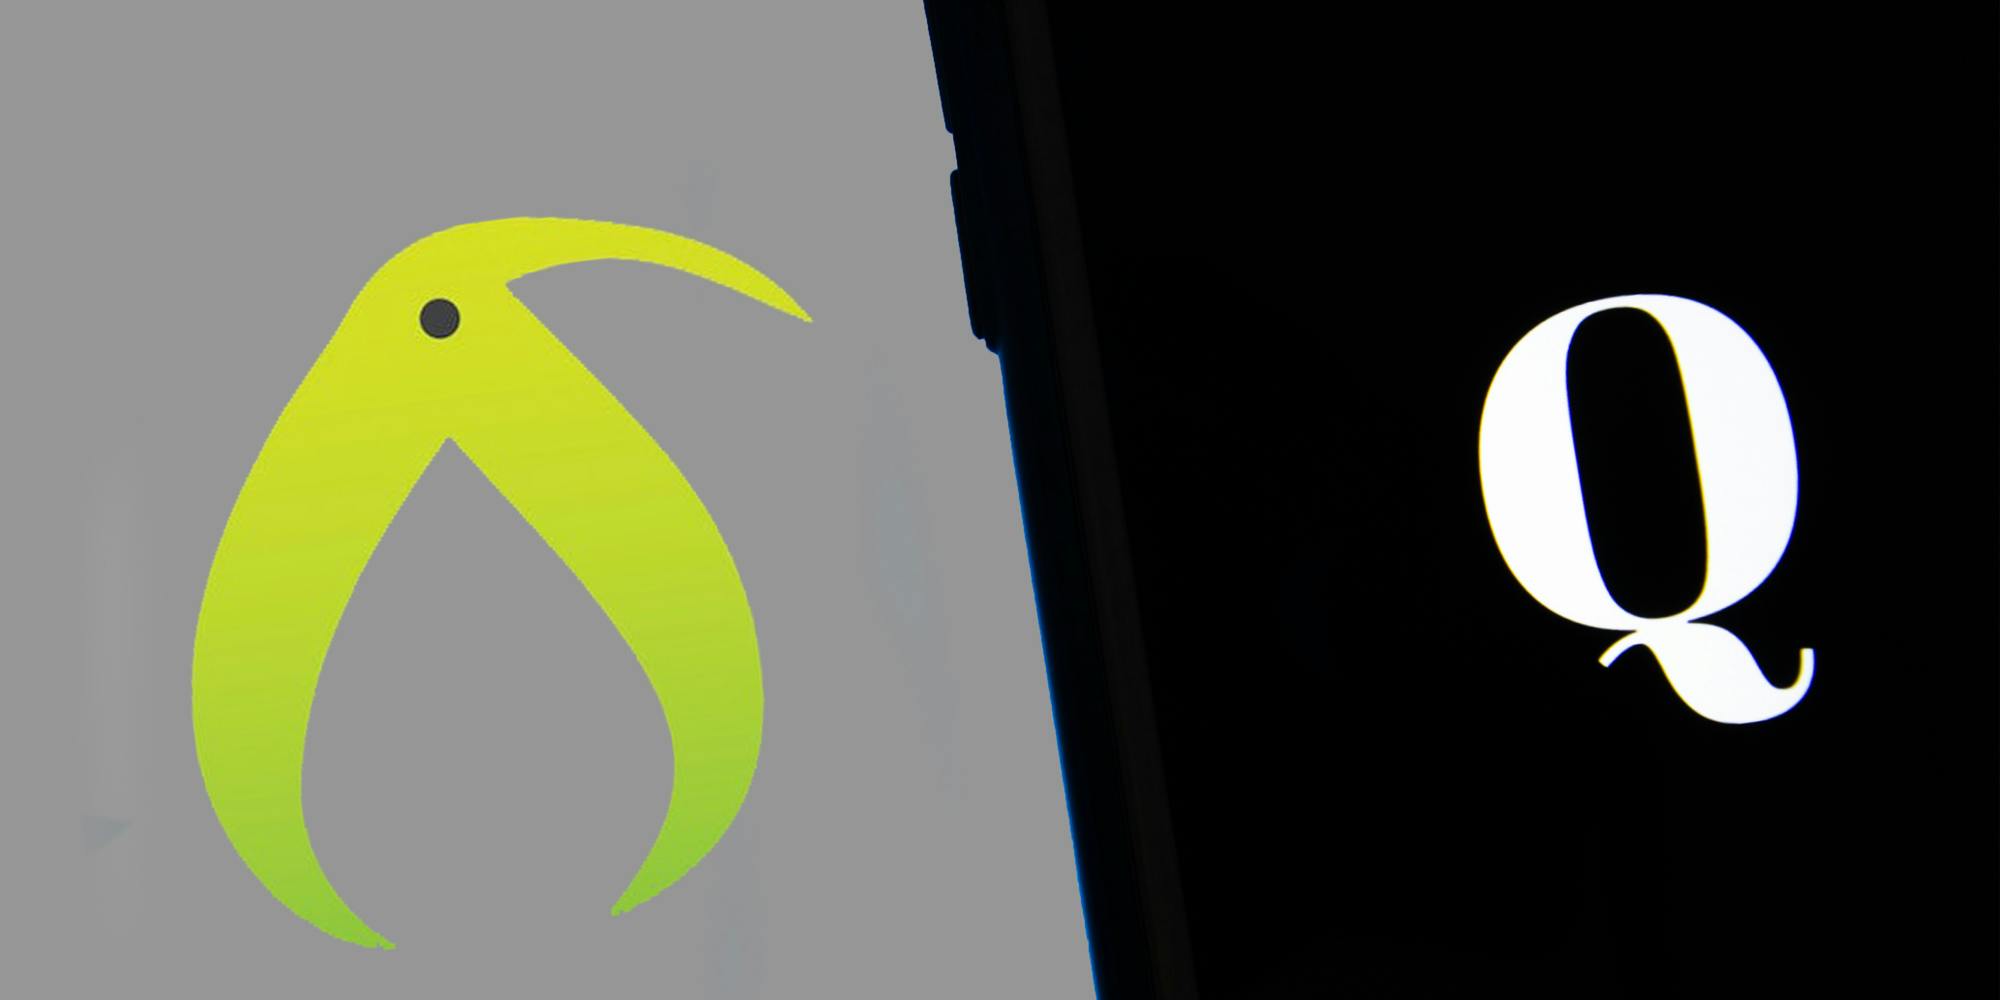 Kiwi Farms logo on gray background with silhouette of phone with "Q" on screen on right